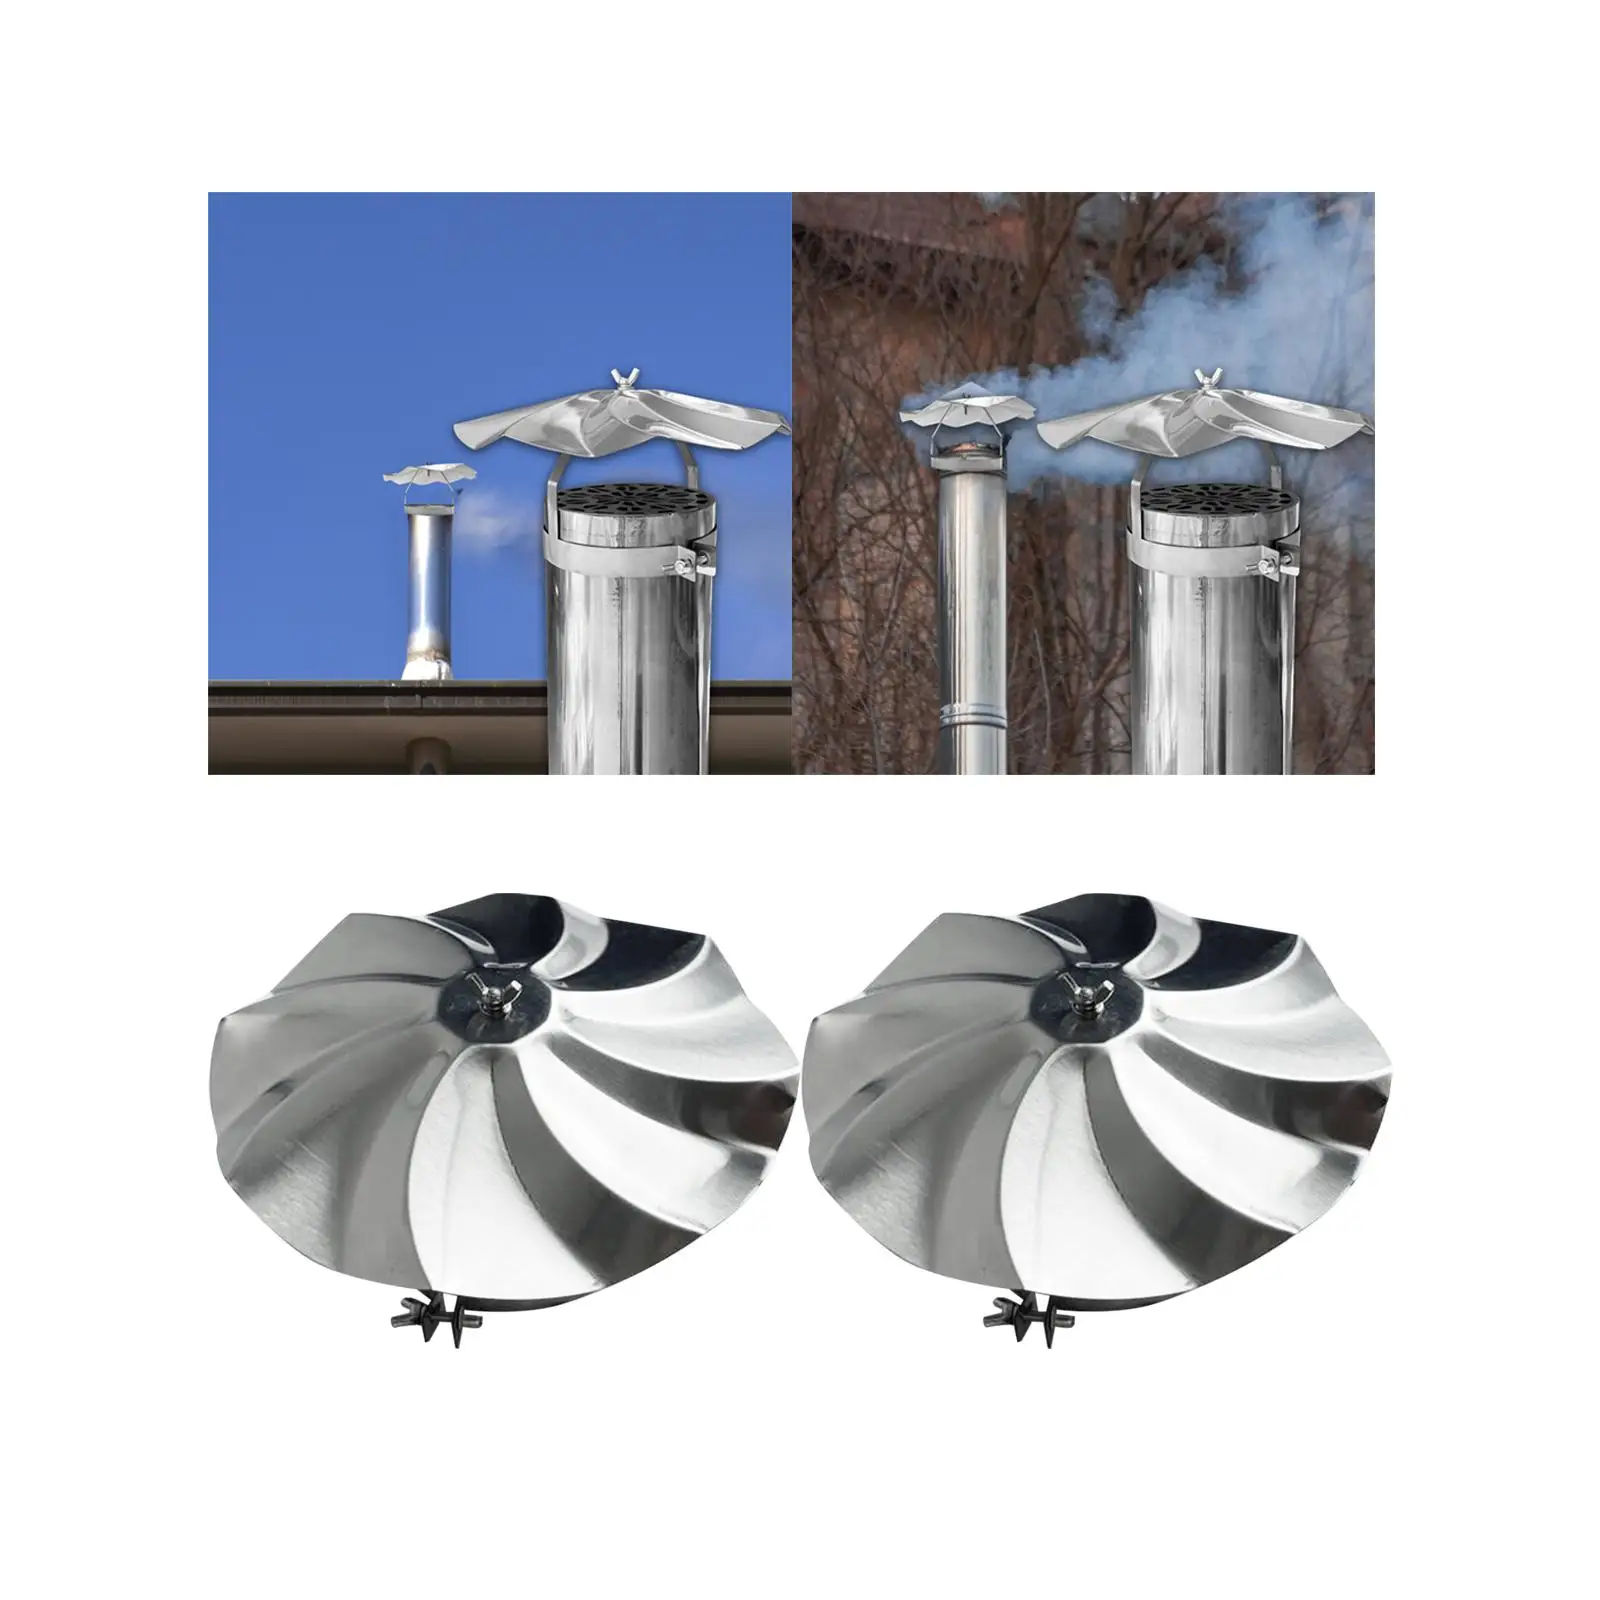 Chimney Caps Simple Install Rainproof Durable Lightweight Protective Portable Replacement Practical Chimney Covers Flue Rain Cap